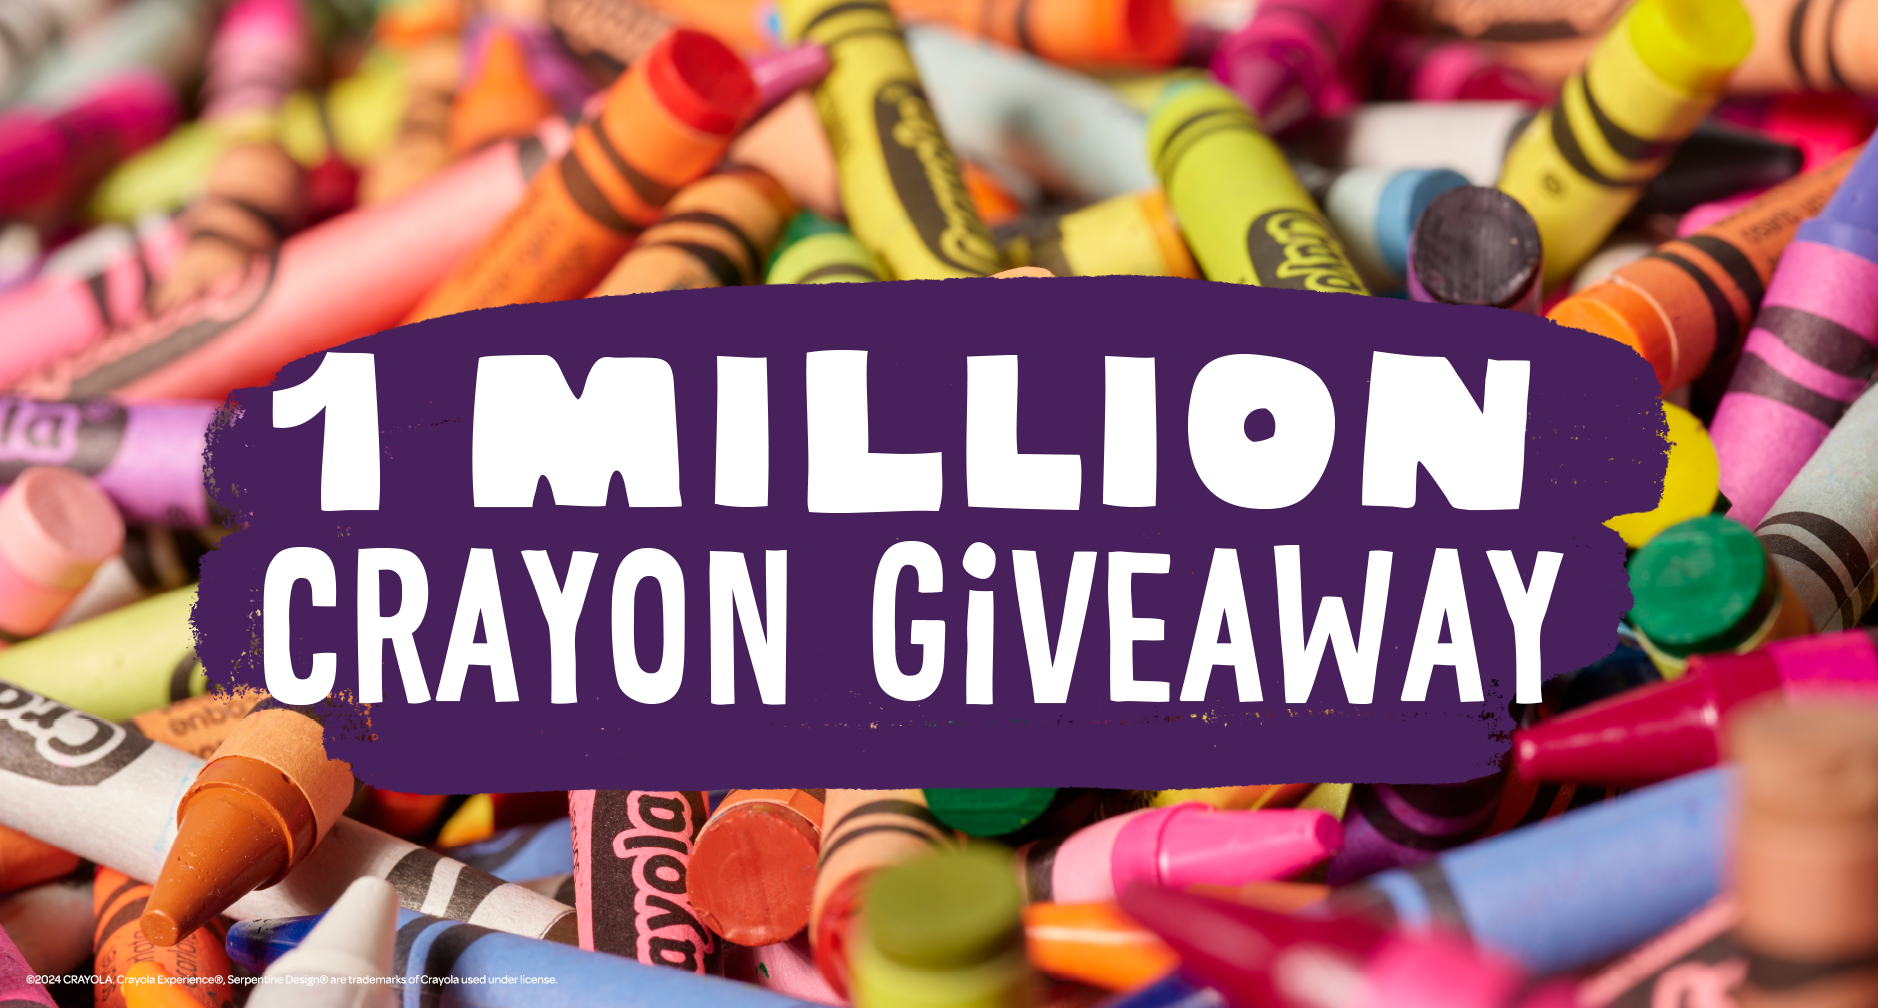 We’re Giving Away 1 Million Crayons!